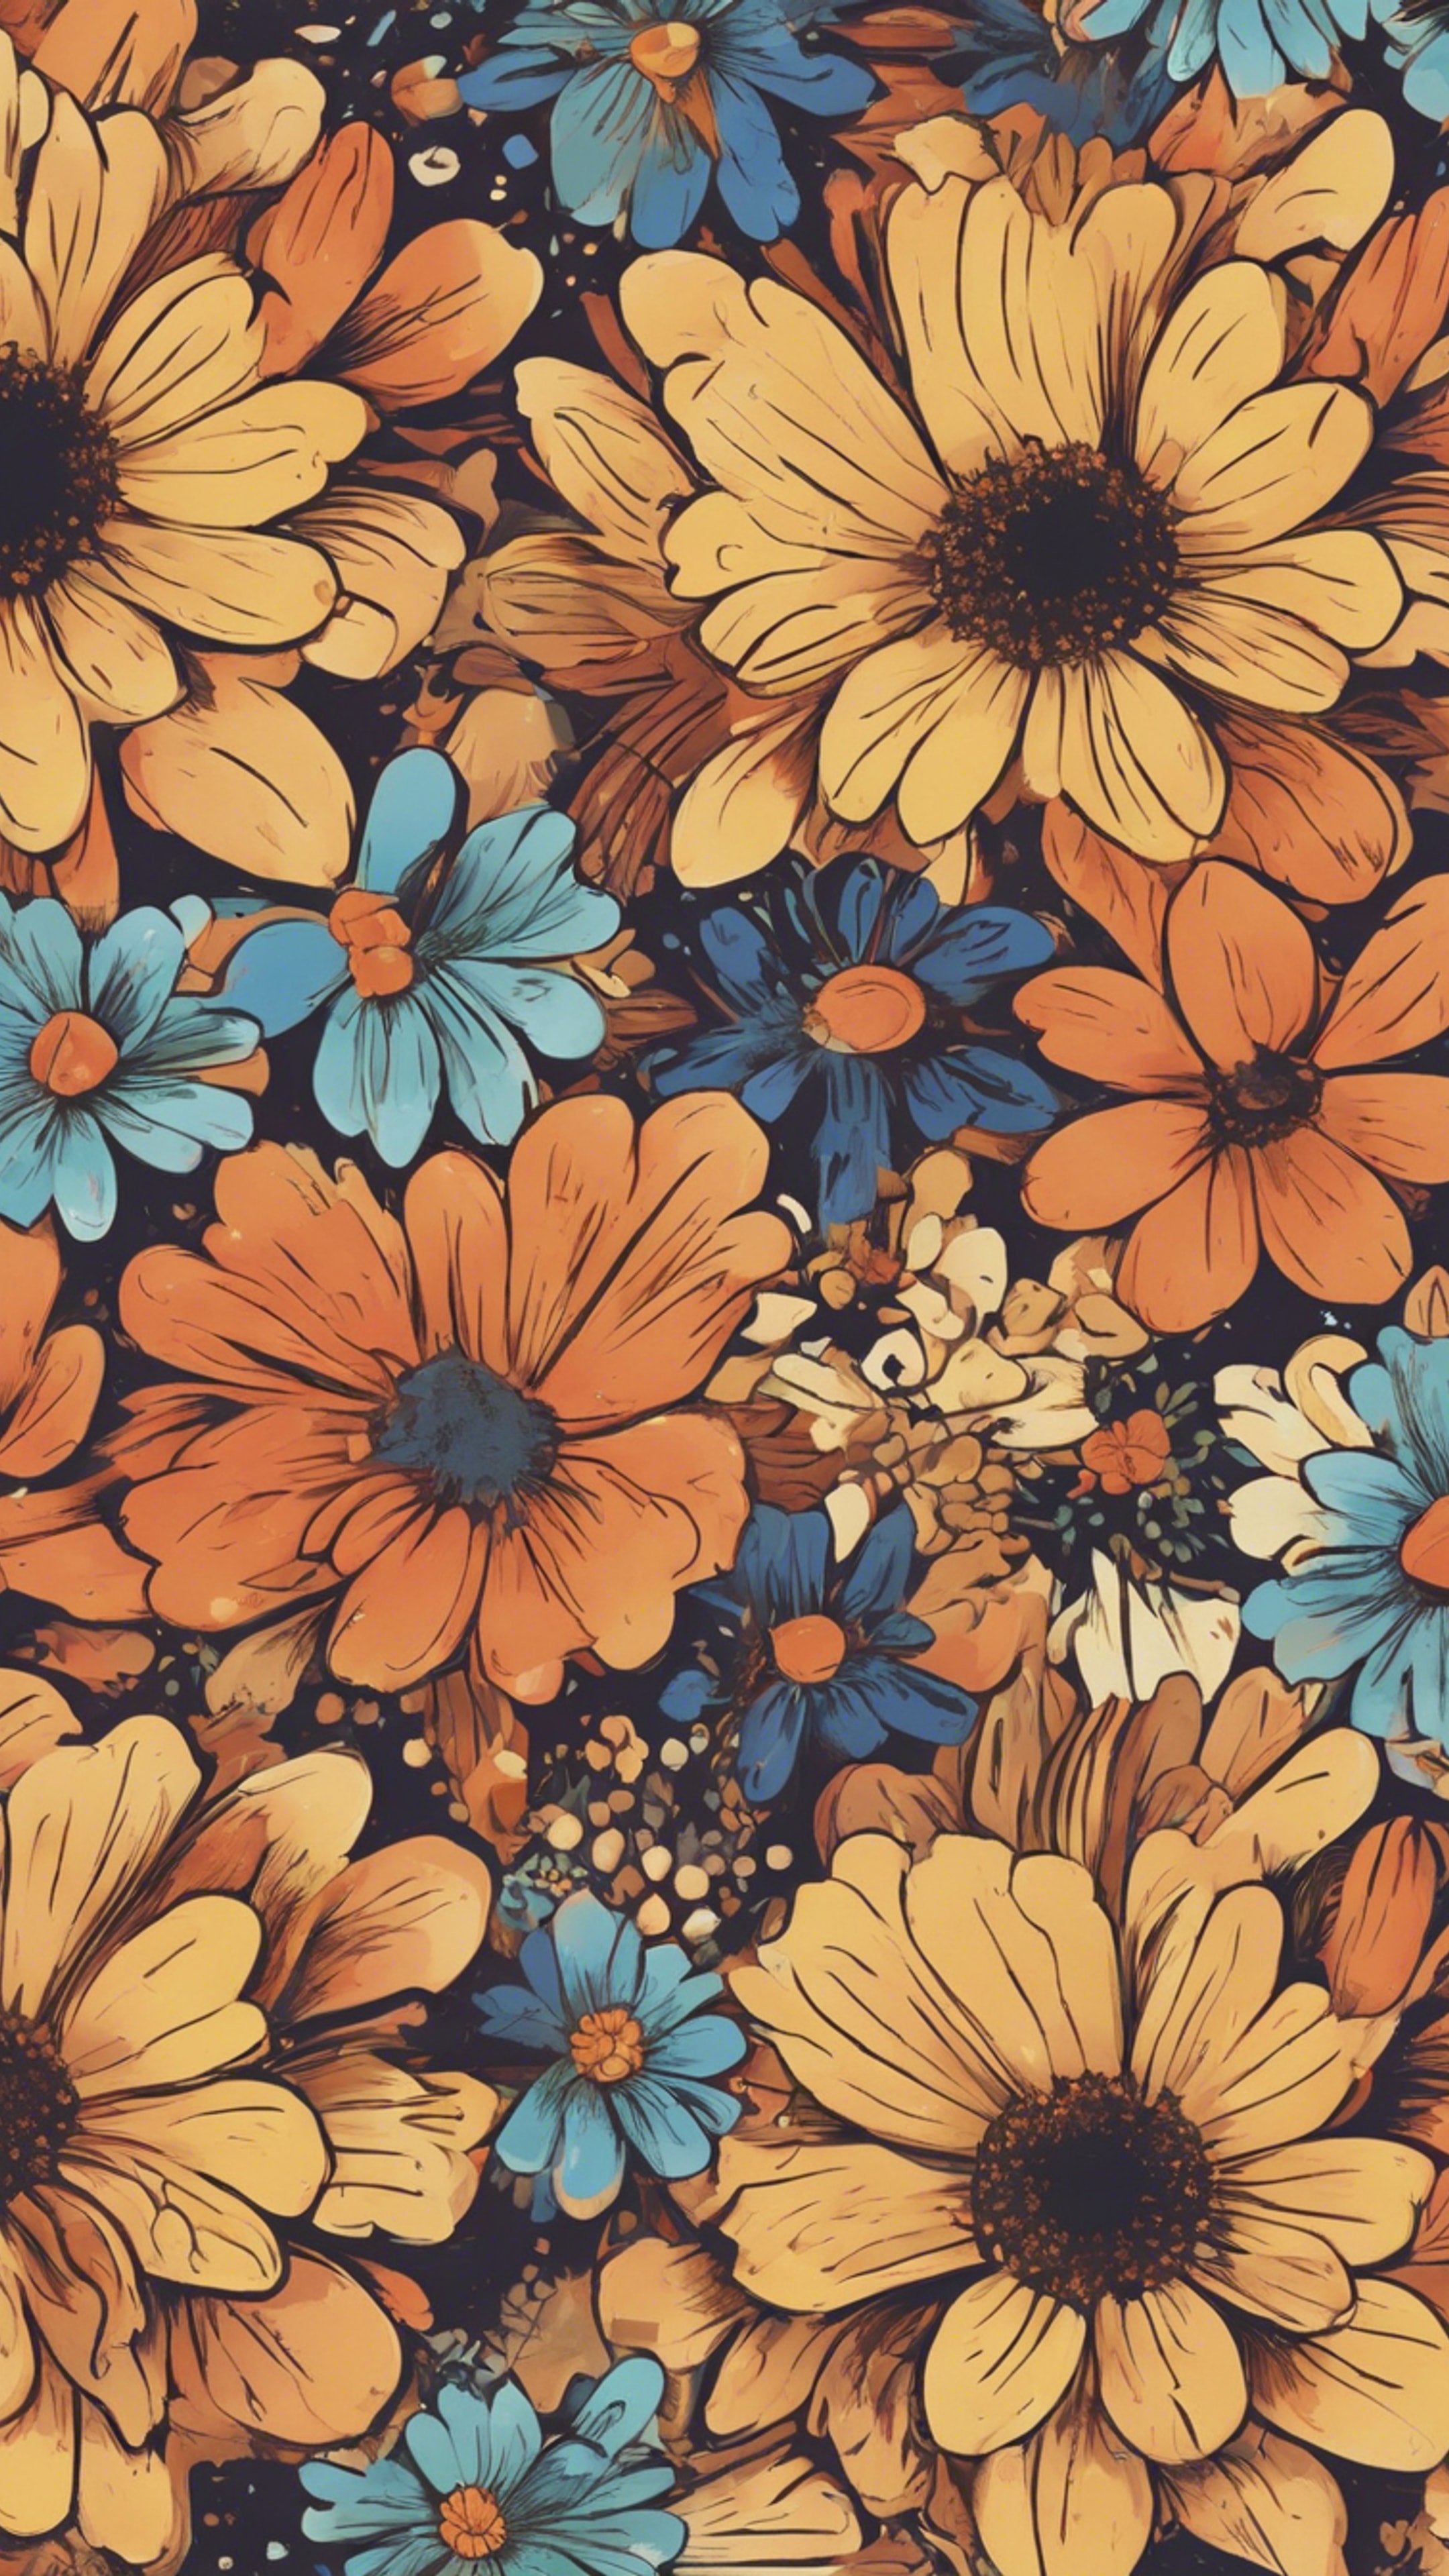 A flower power floral pattern from the seventies.壁紙[74e7941769ae4e7d8a67]